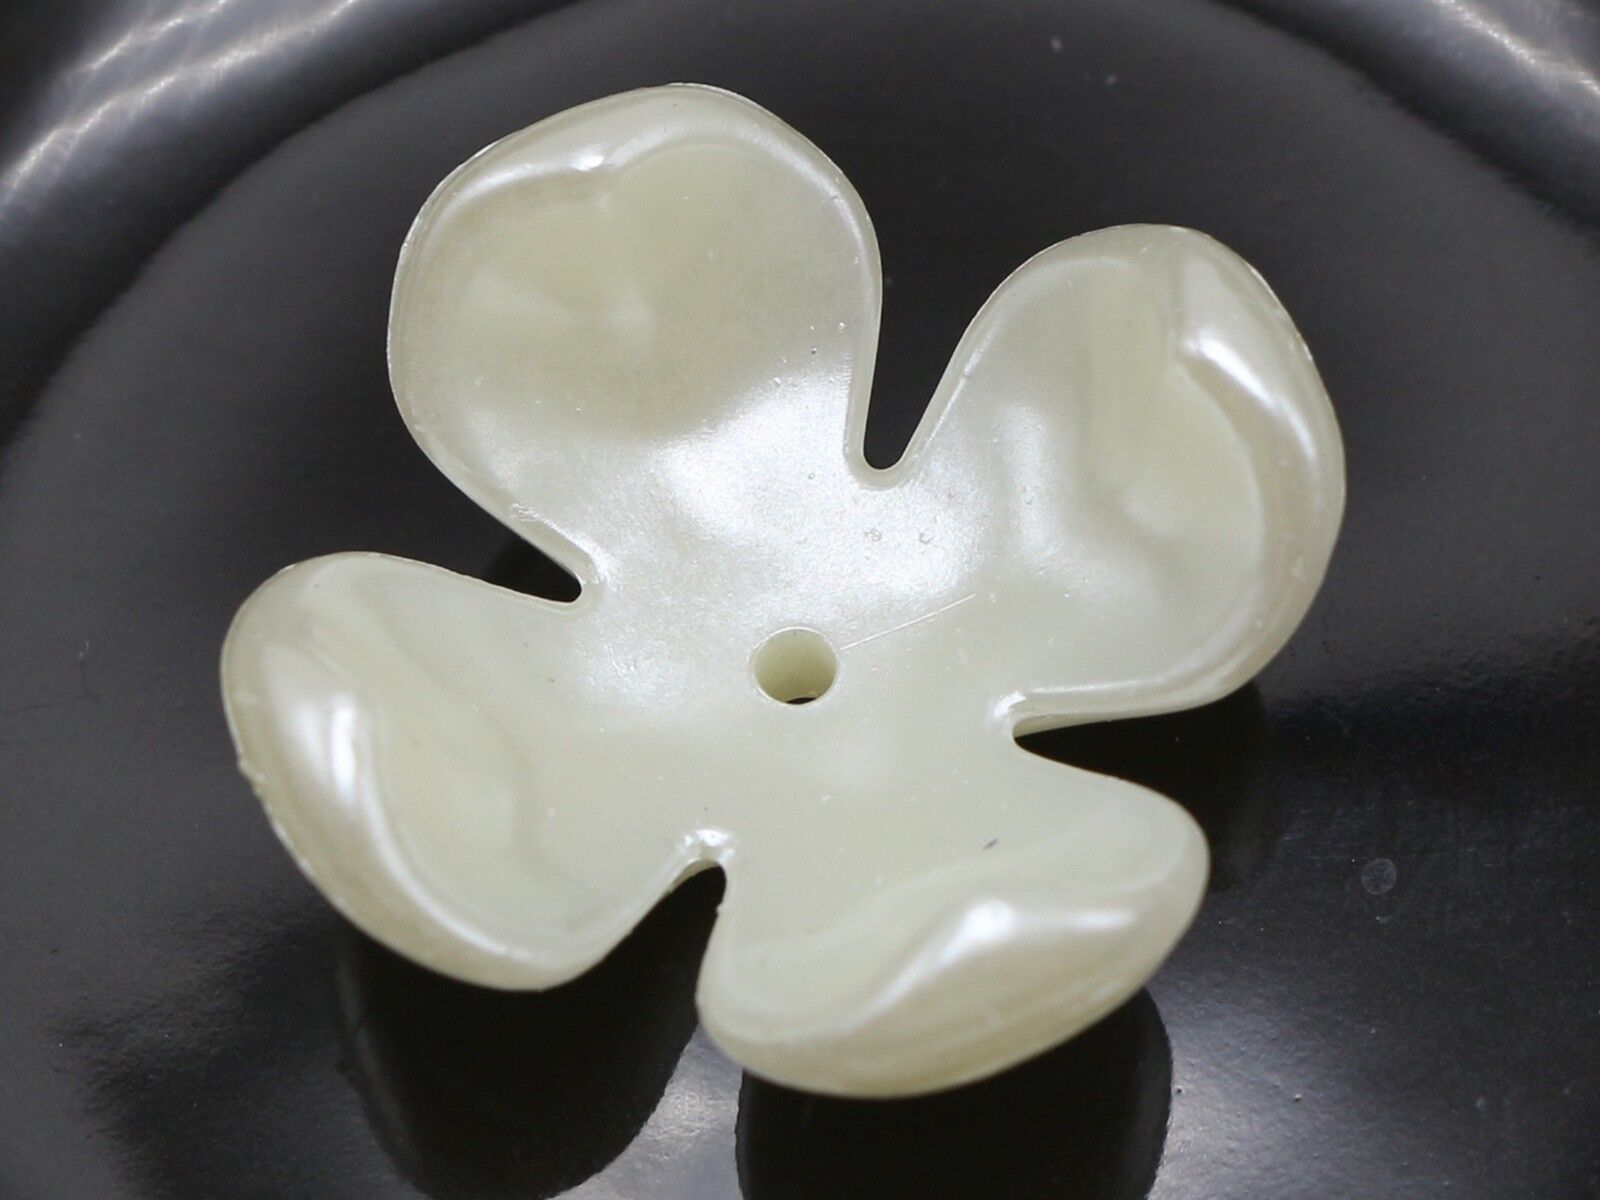 25 Ivory Acrylic Large Pearl 4-Petals Flower Beads Cap 24mm Center Hole Sewing